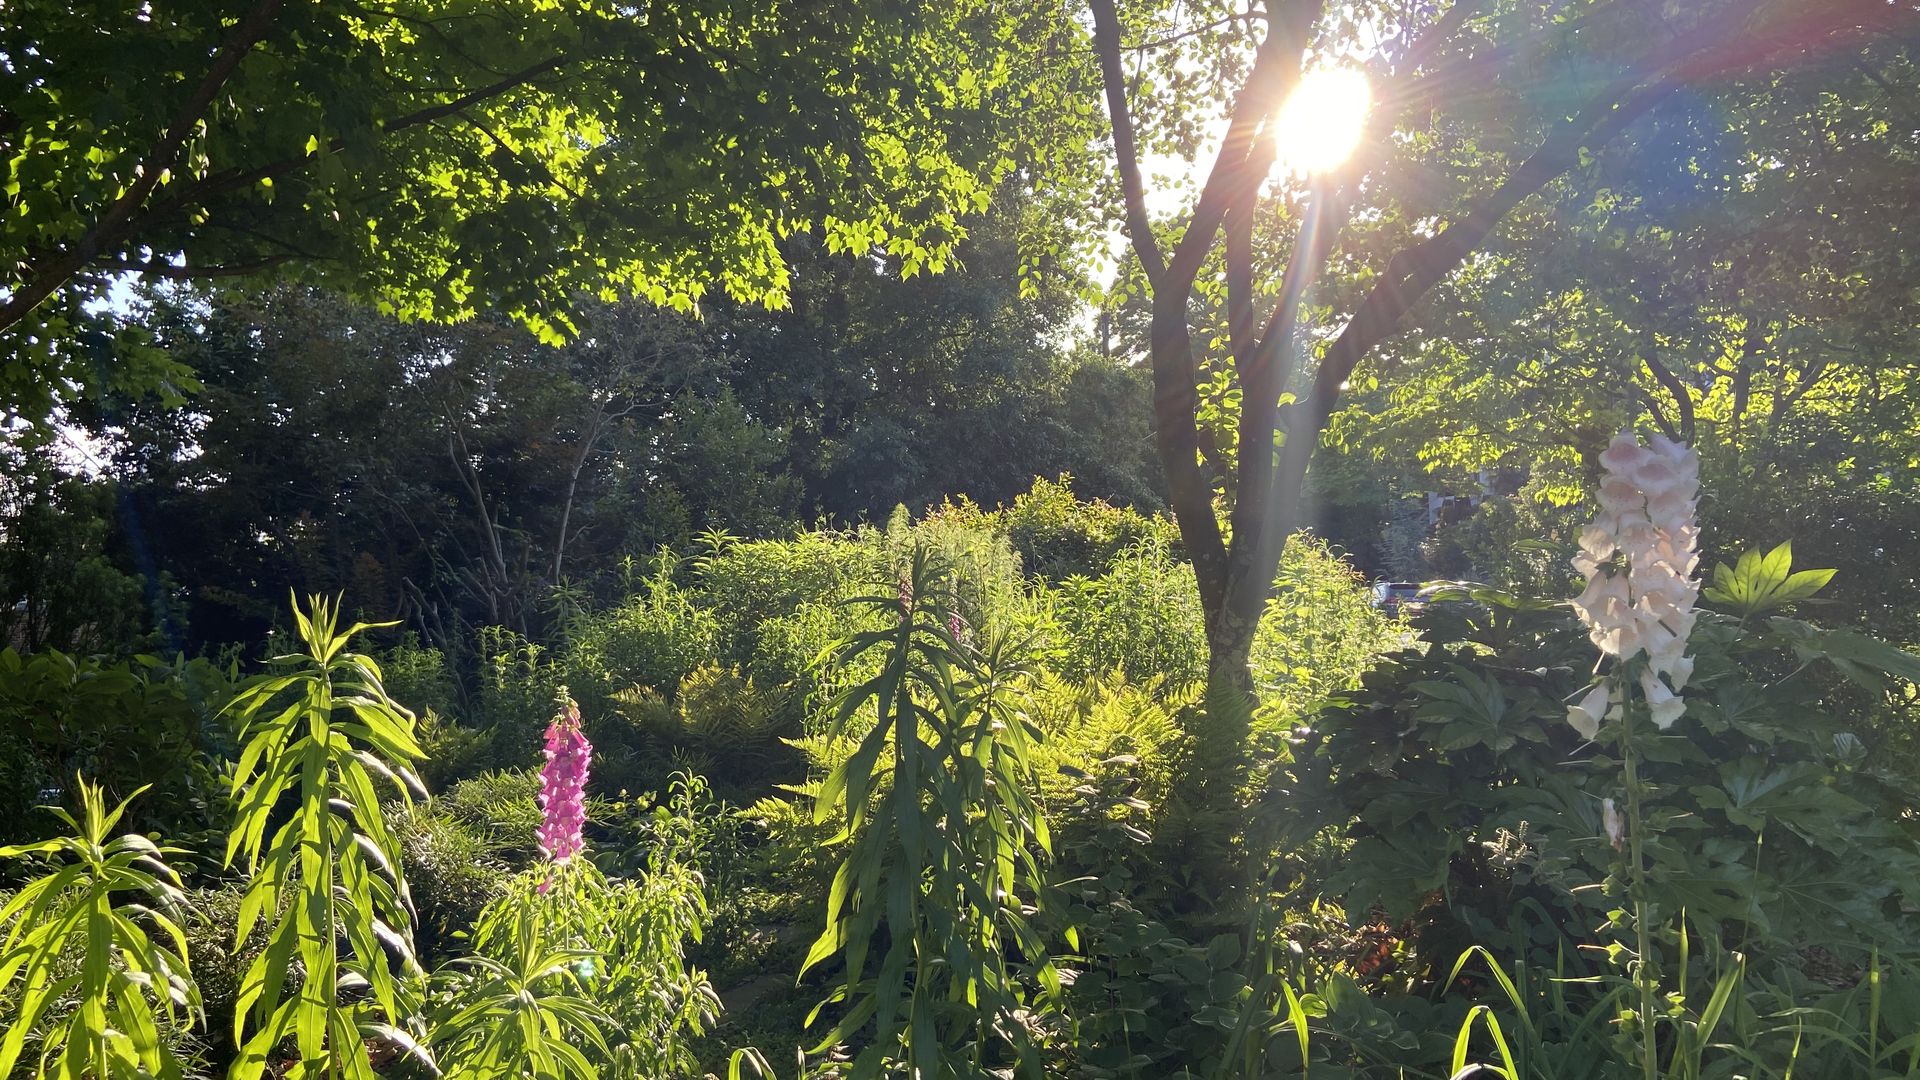 A close-up of a verdant garden filled with native species like aster as the setting sun peeks through branches